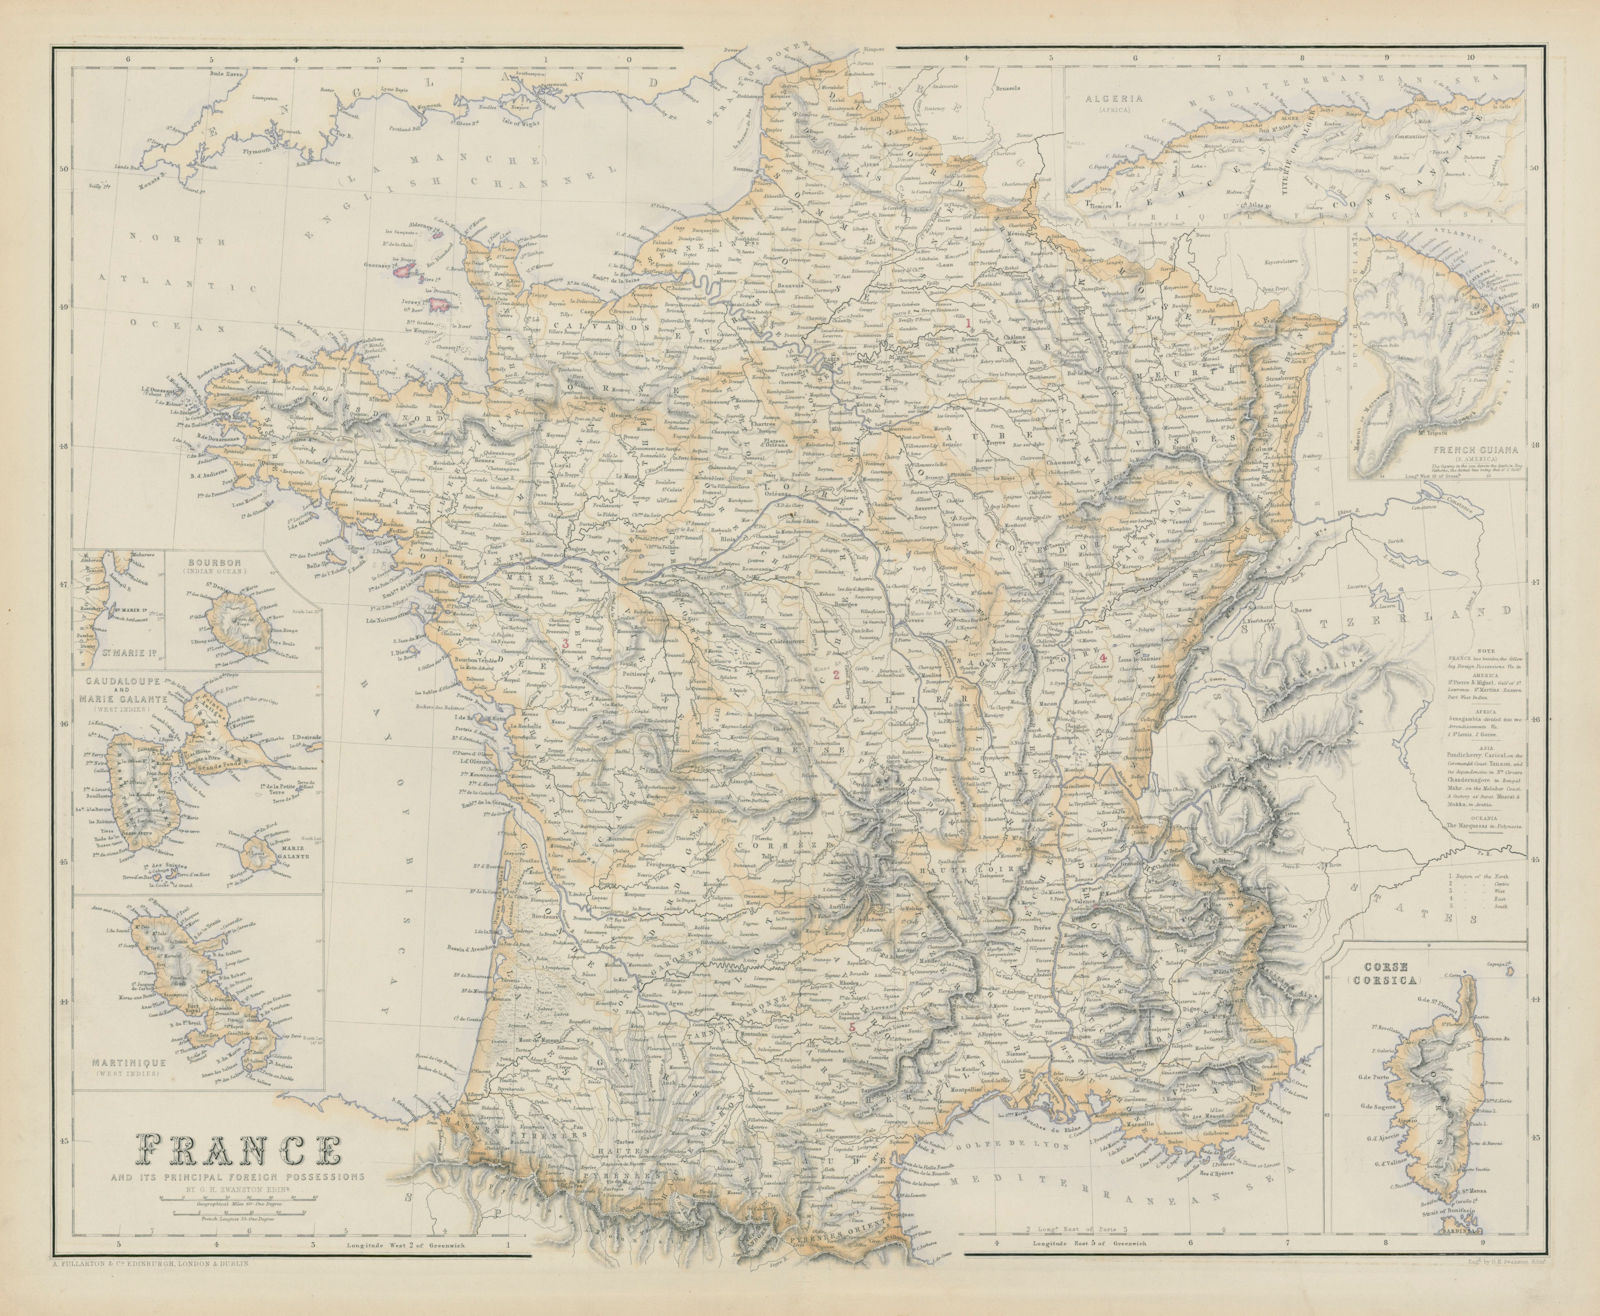 Associate Product France & principal foreign possessions. Guadaloupe Martinique. SWANSTON 1860 map